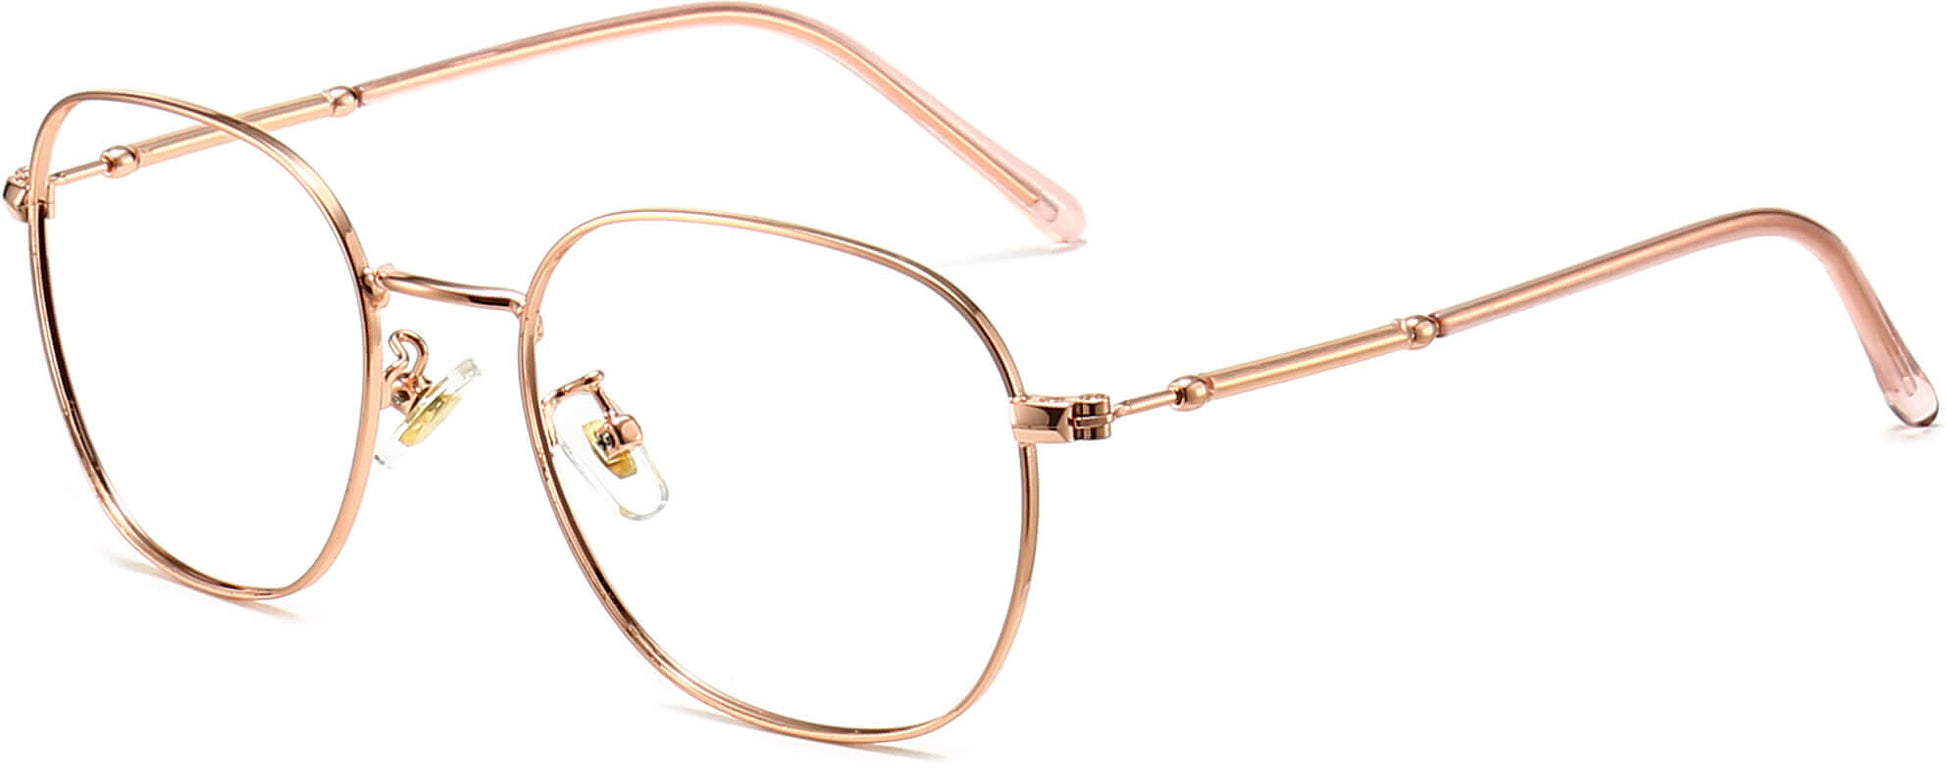 Harper Round Rose Gold Eyeglasses from ANRRI, angle view